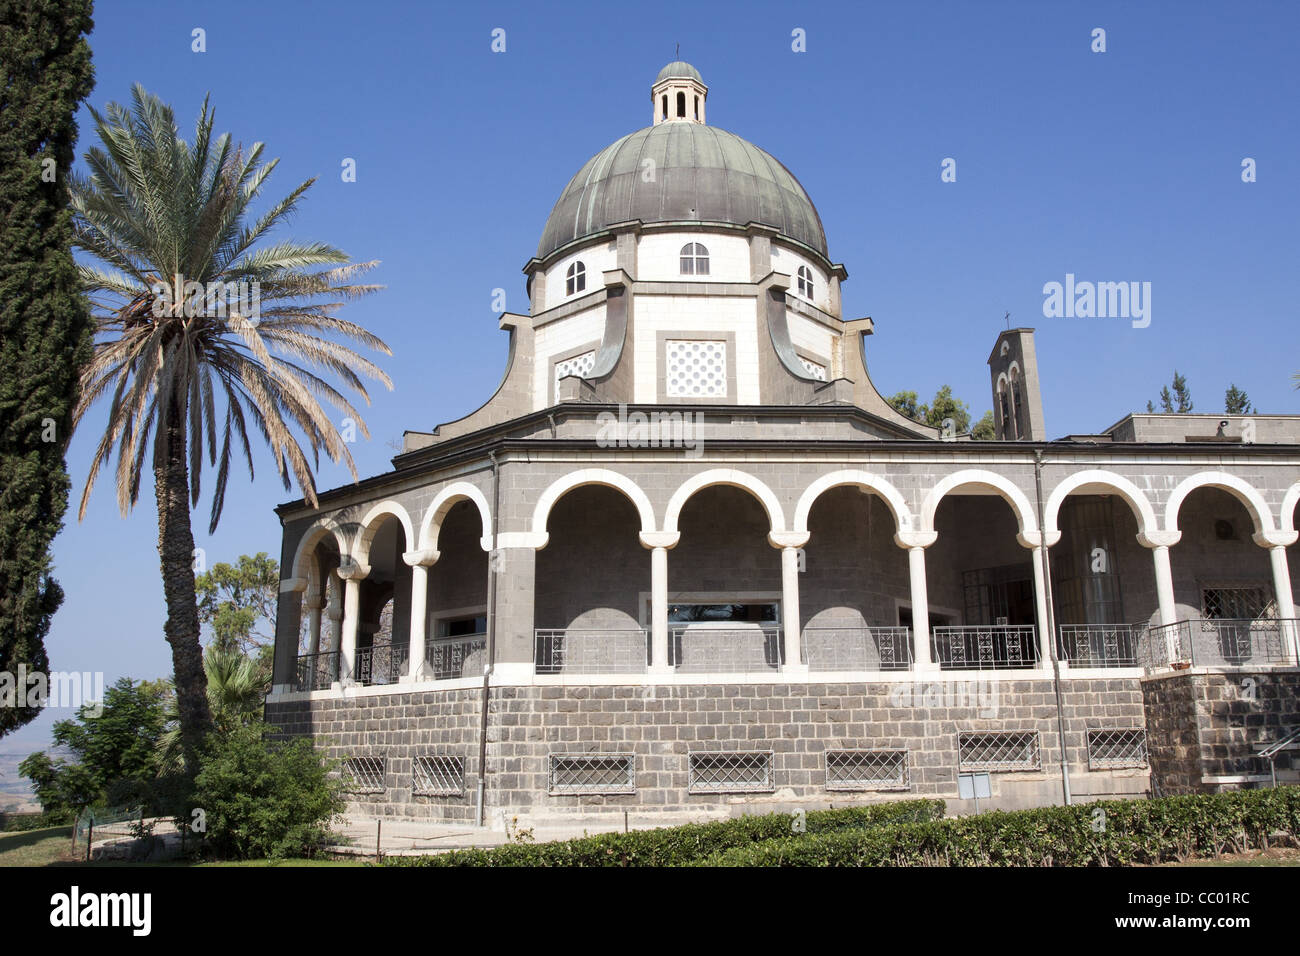 CHURCH OF THE BEATITUDES BUILT IN 1939 BY THE ARCHITECT ANTONIO BARLUZZI ON THE MOUNT OF BEATITUDES, GALILEE, ISRAEL Stock Photo